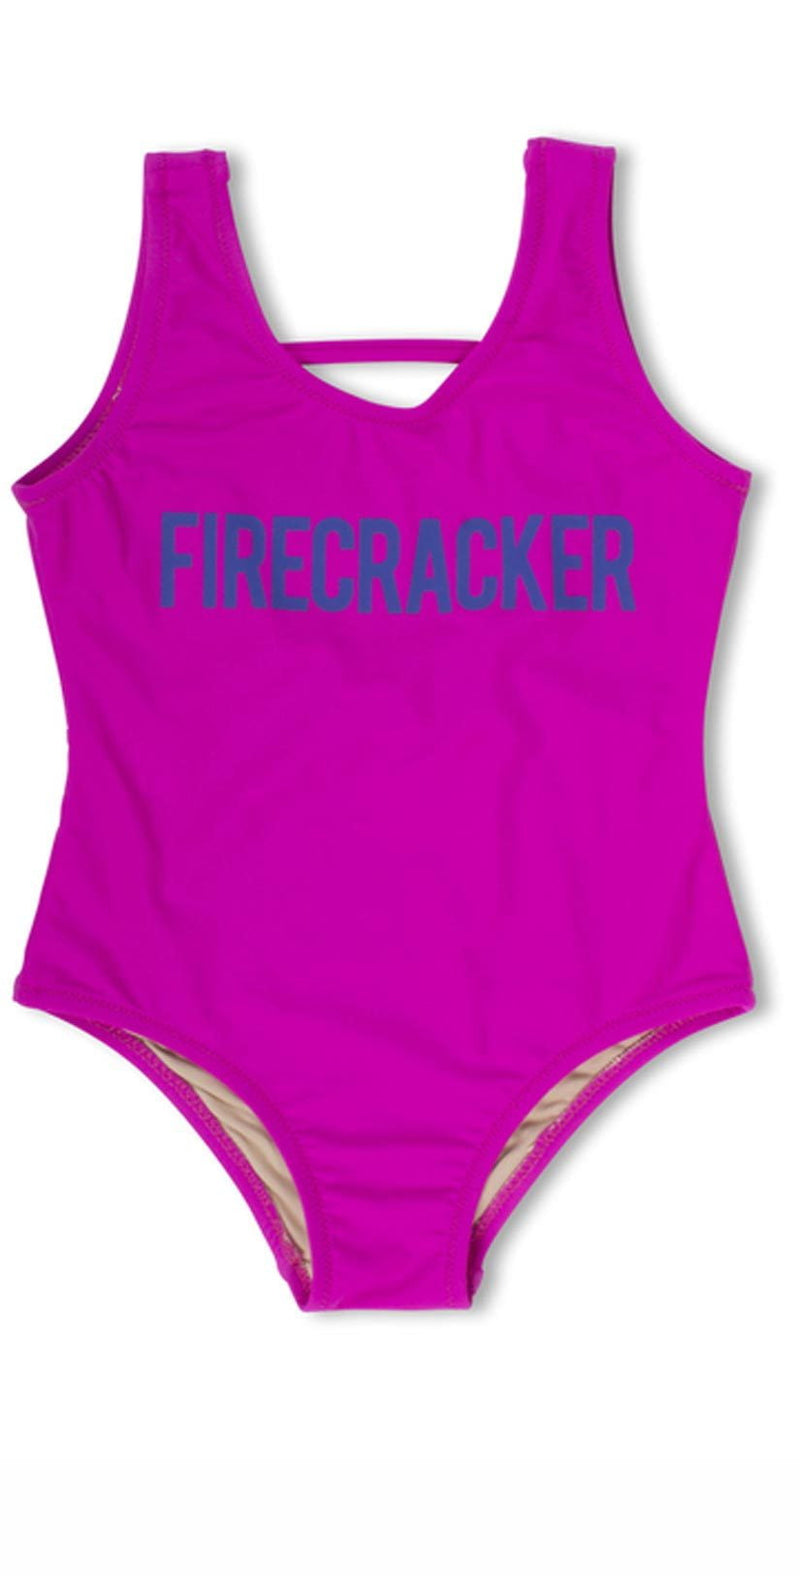 Shade Critters Firecracker One Piece Swimsuit in Pink SG01A-043: